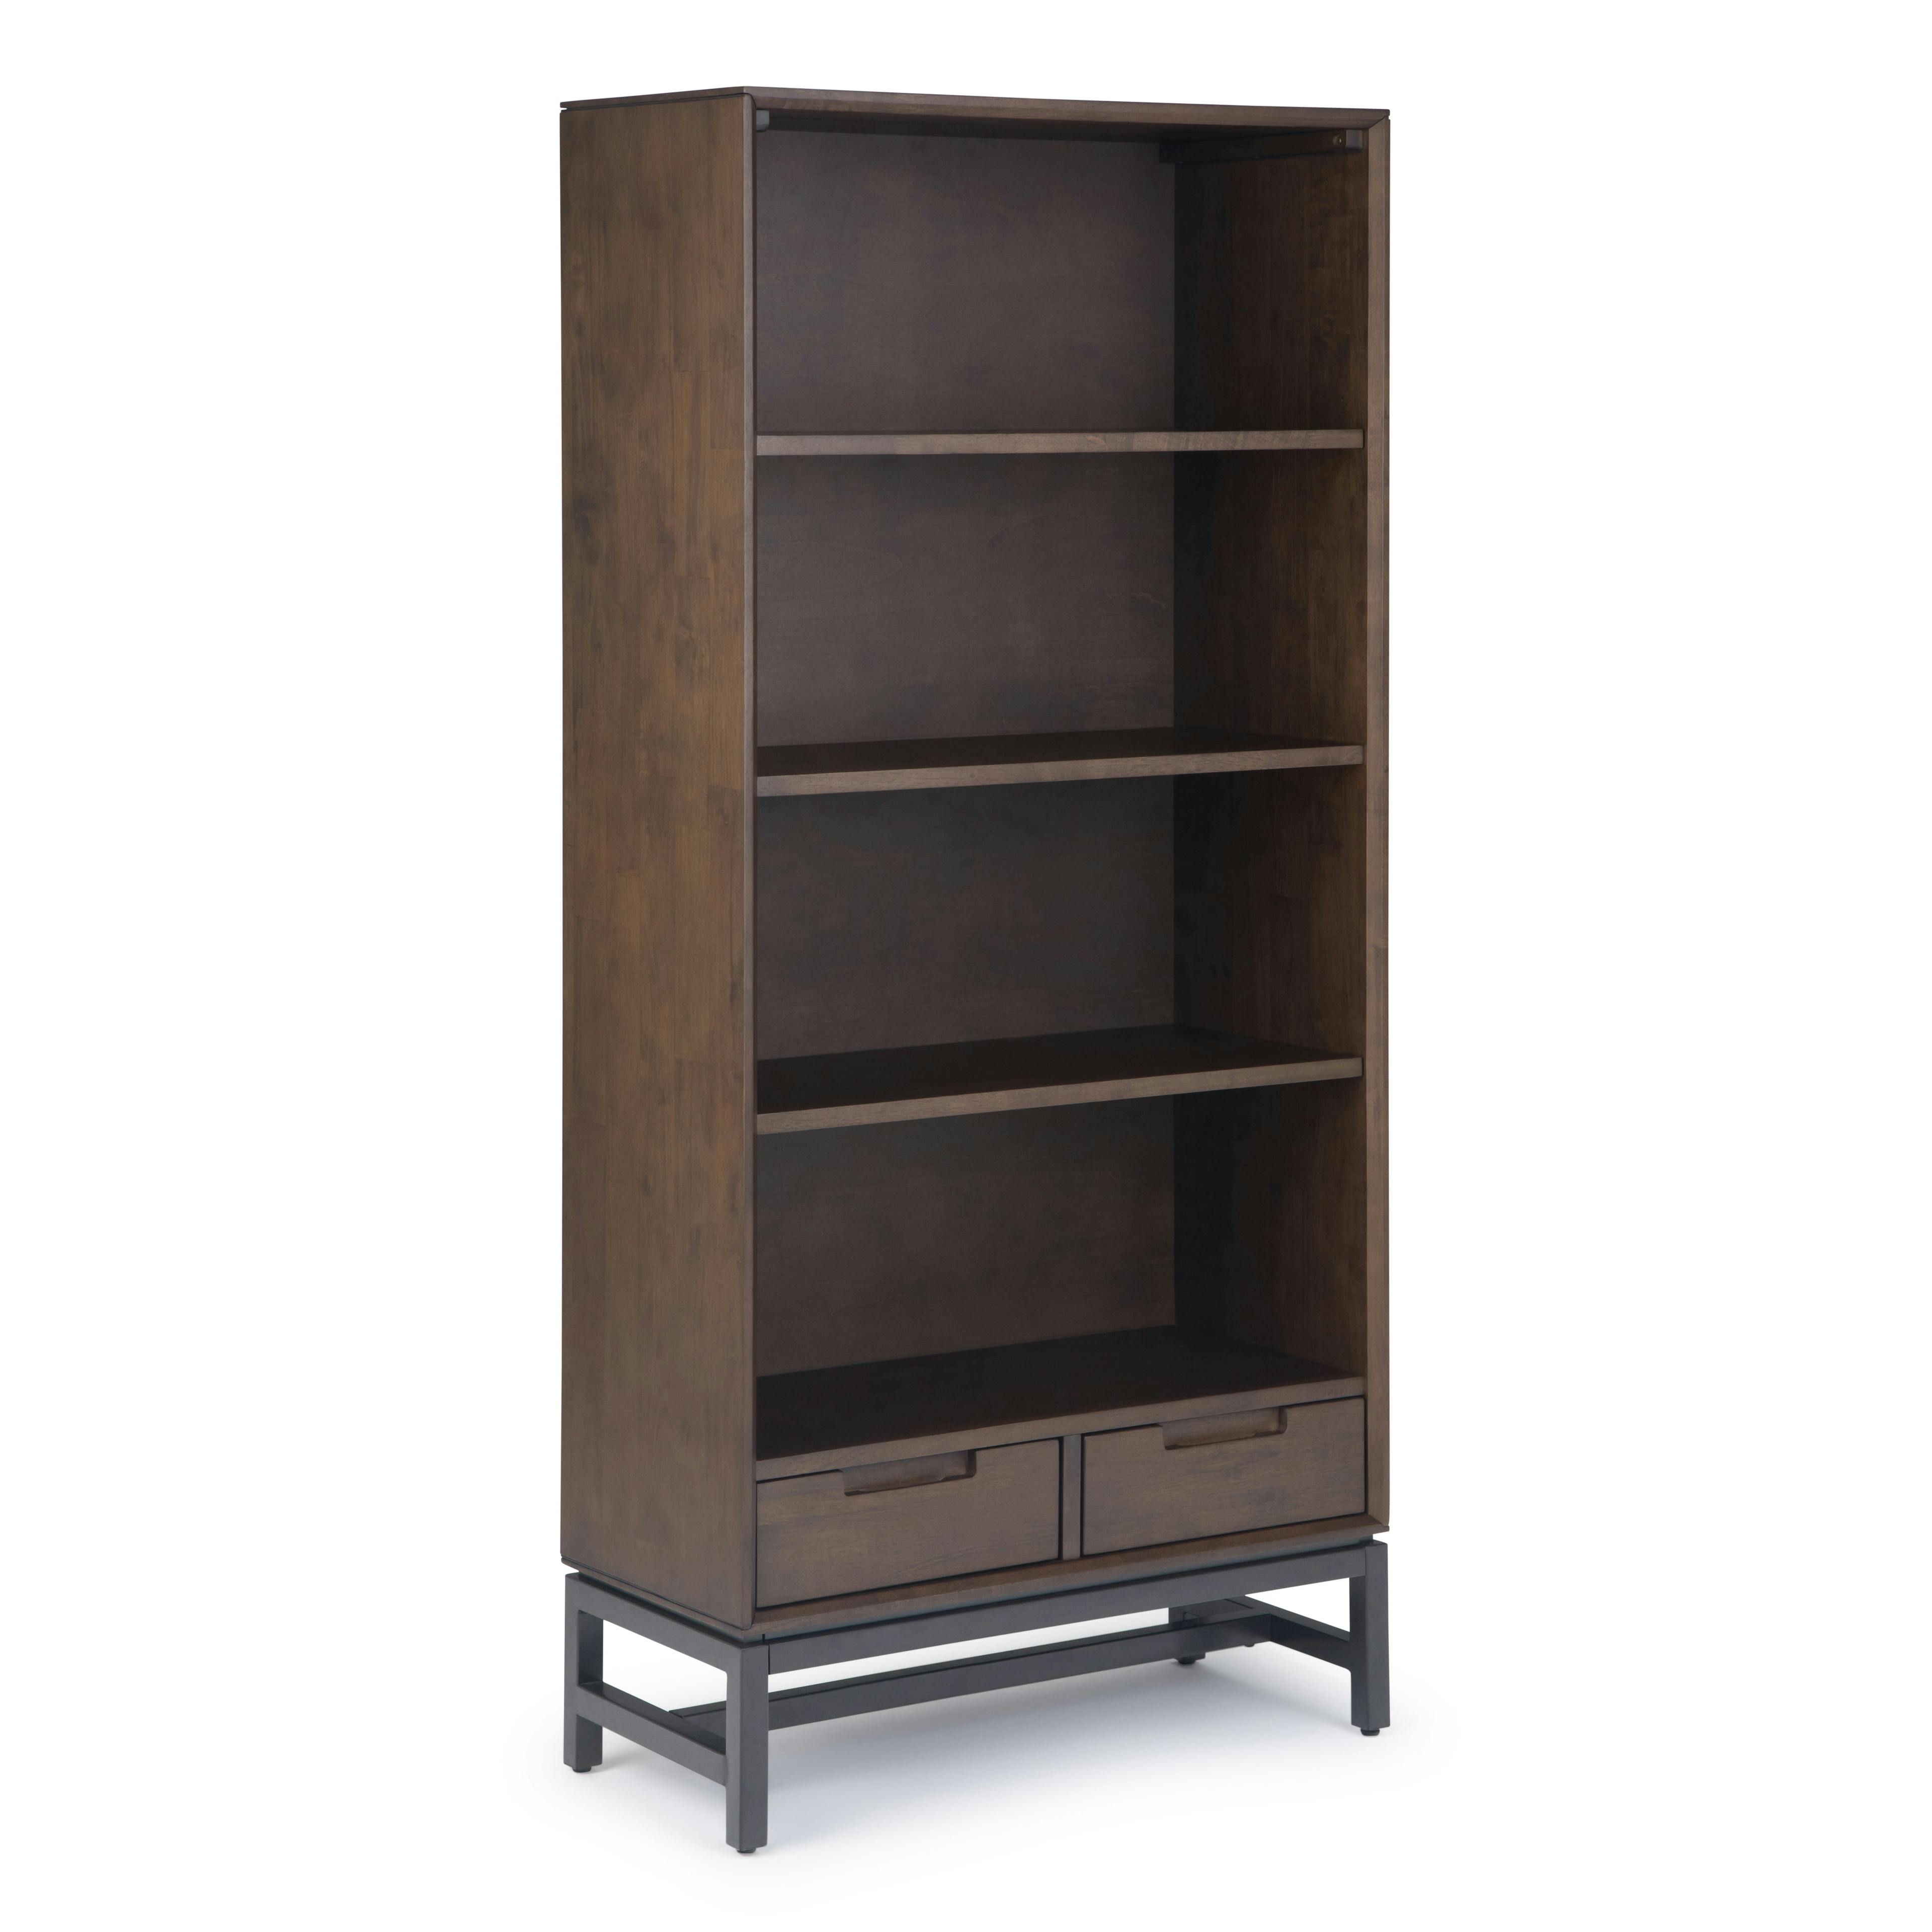 Banting Mid-Century Modern Walnut Brown Bookcase with Adjustable Shelves